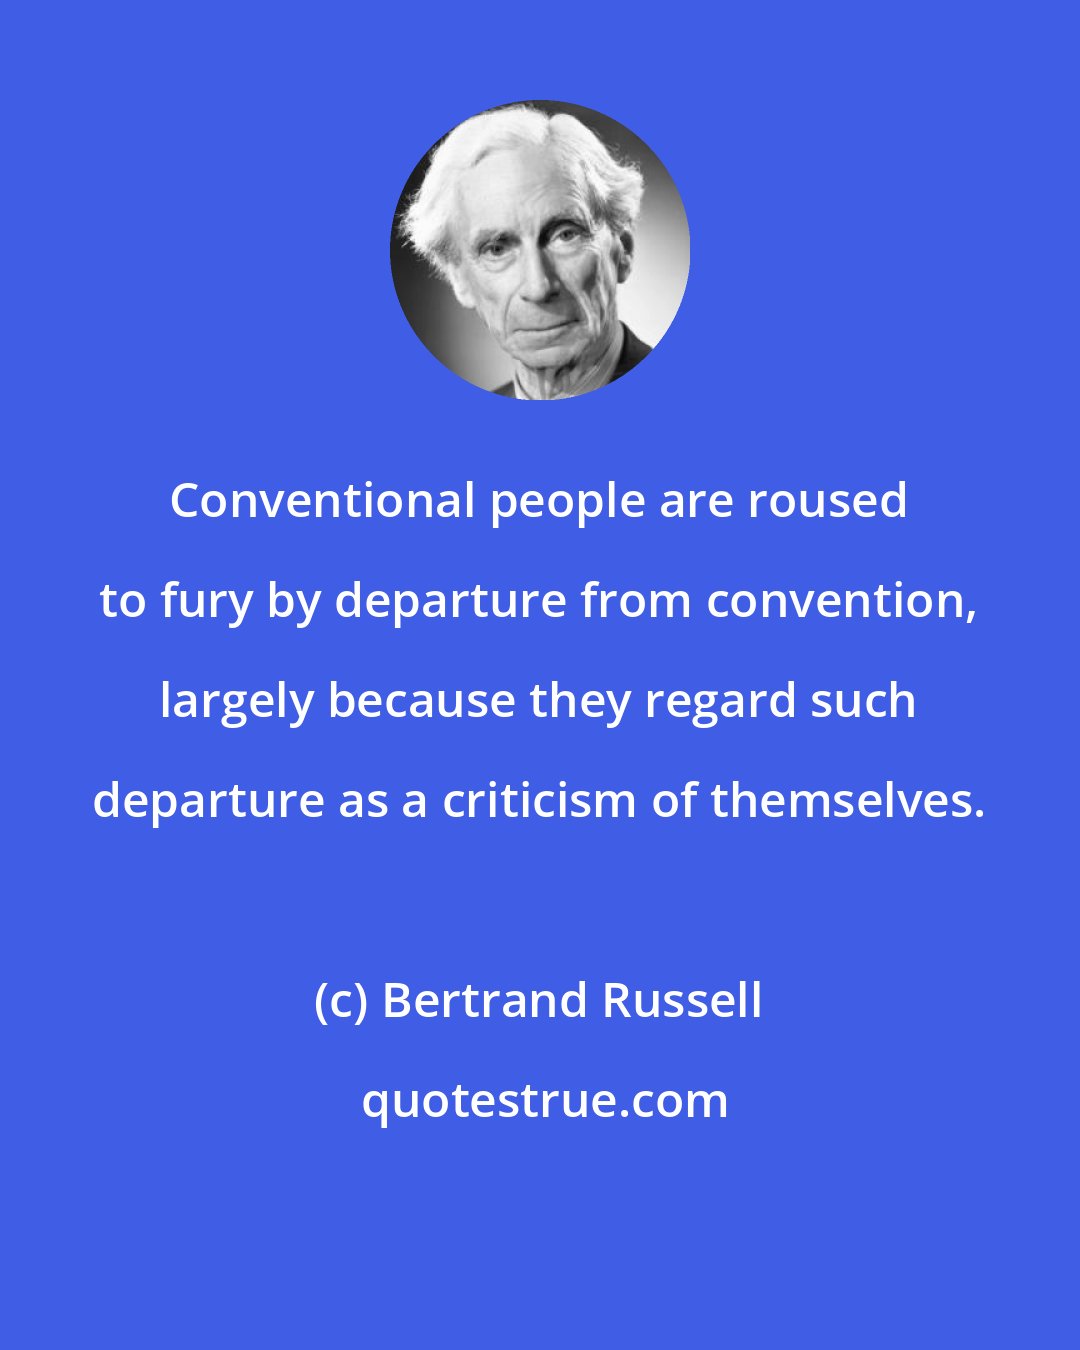 Bertrand Russell: Conventional people are roused to fury by departure from convention, largely because they regard such departure as a criticism of themselves.